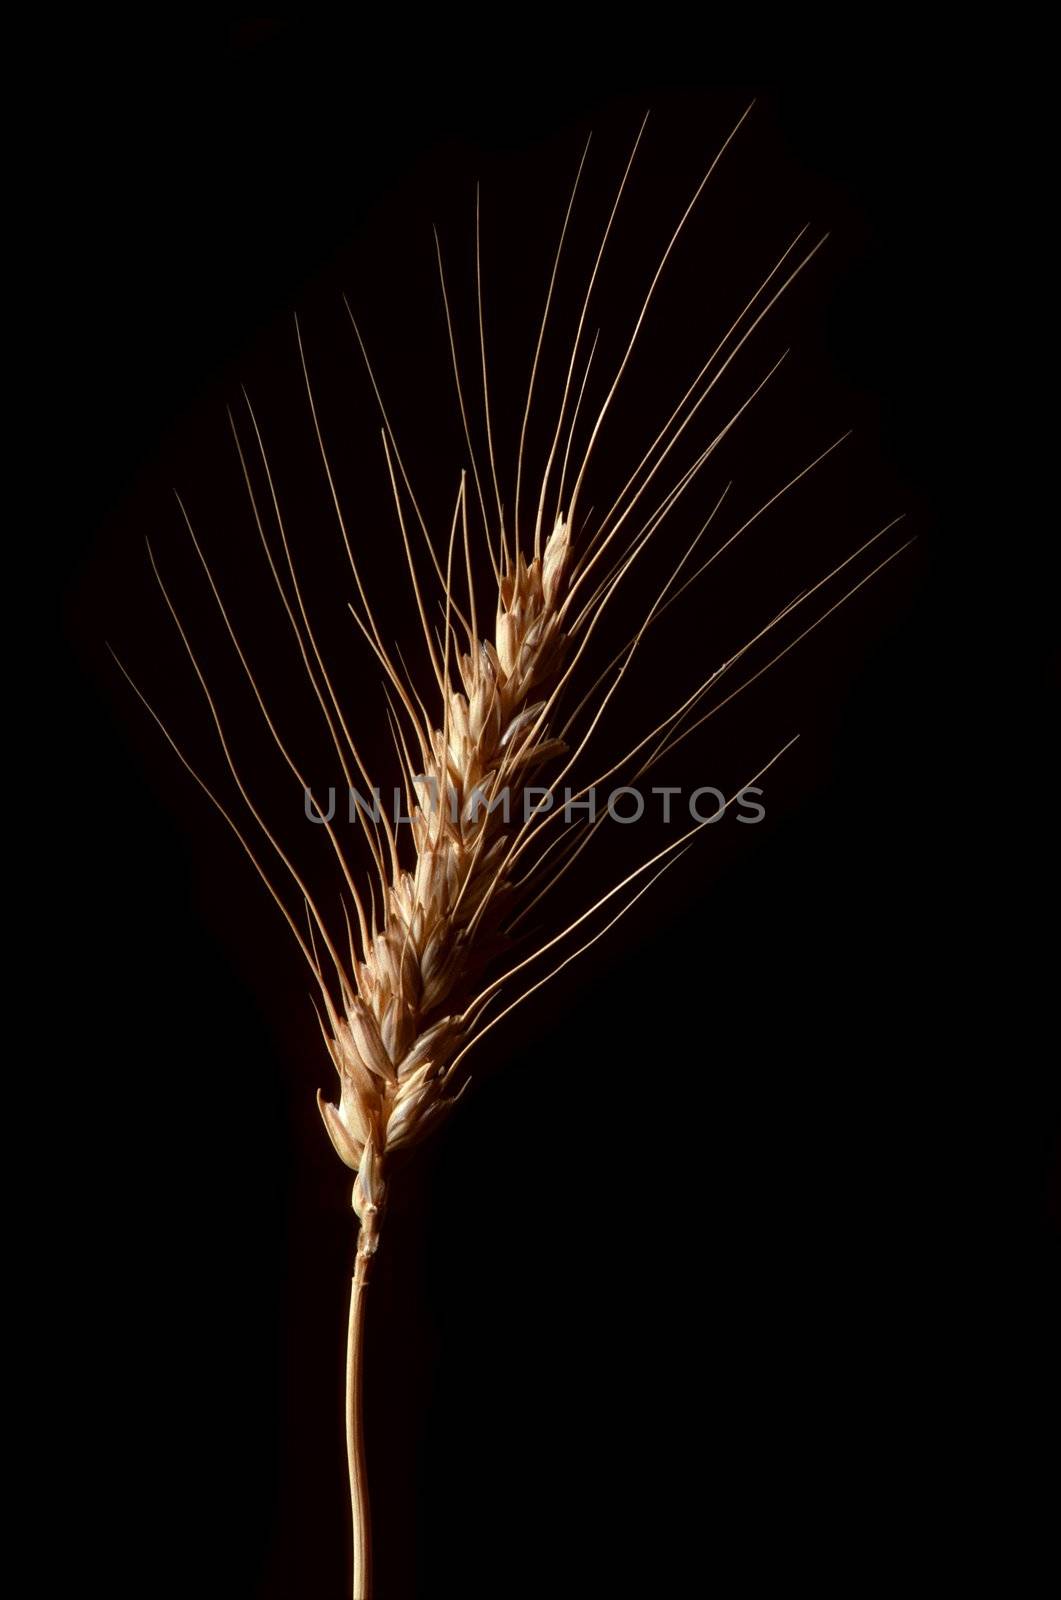 A single stalk of wheat against black background